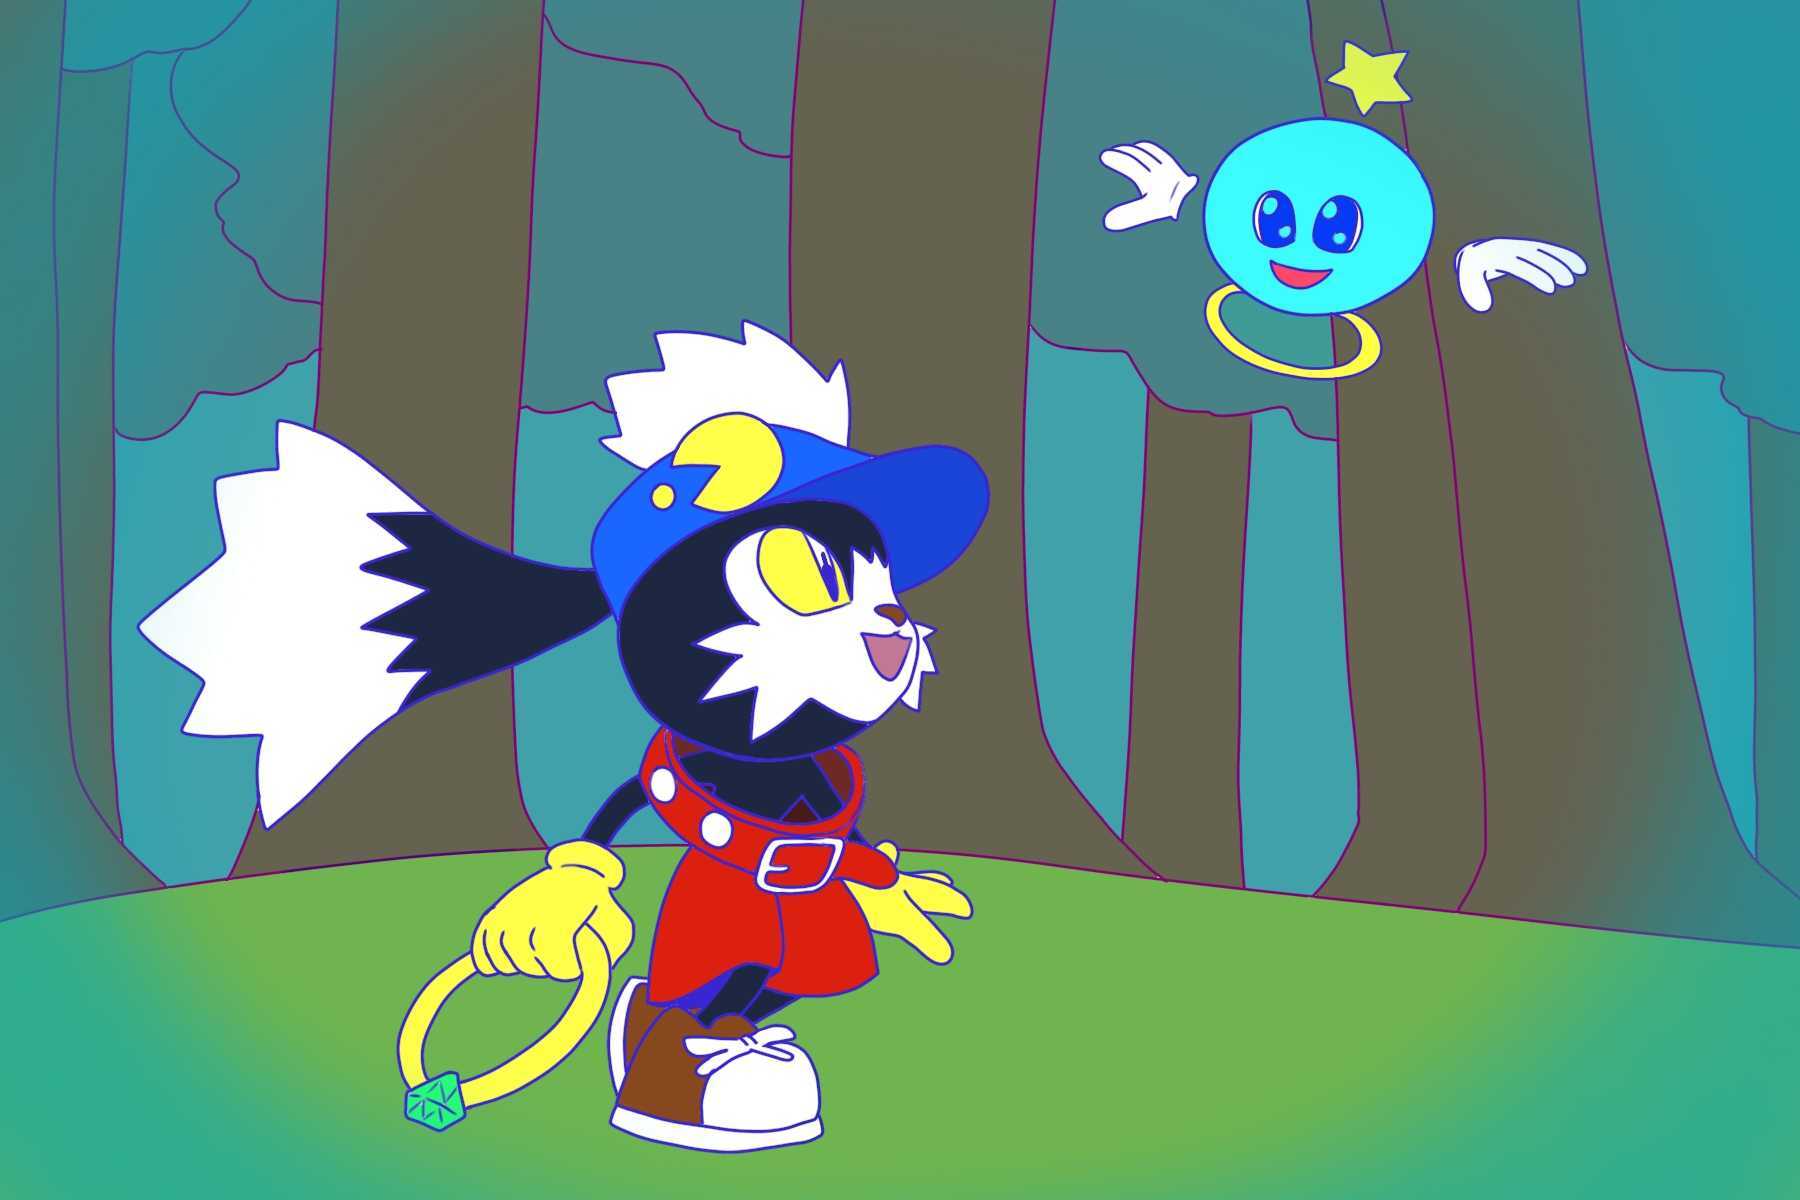 Klonoa in one of his dream worlds